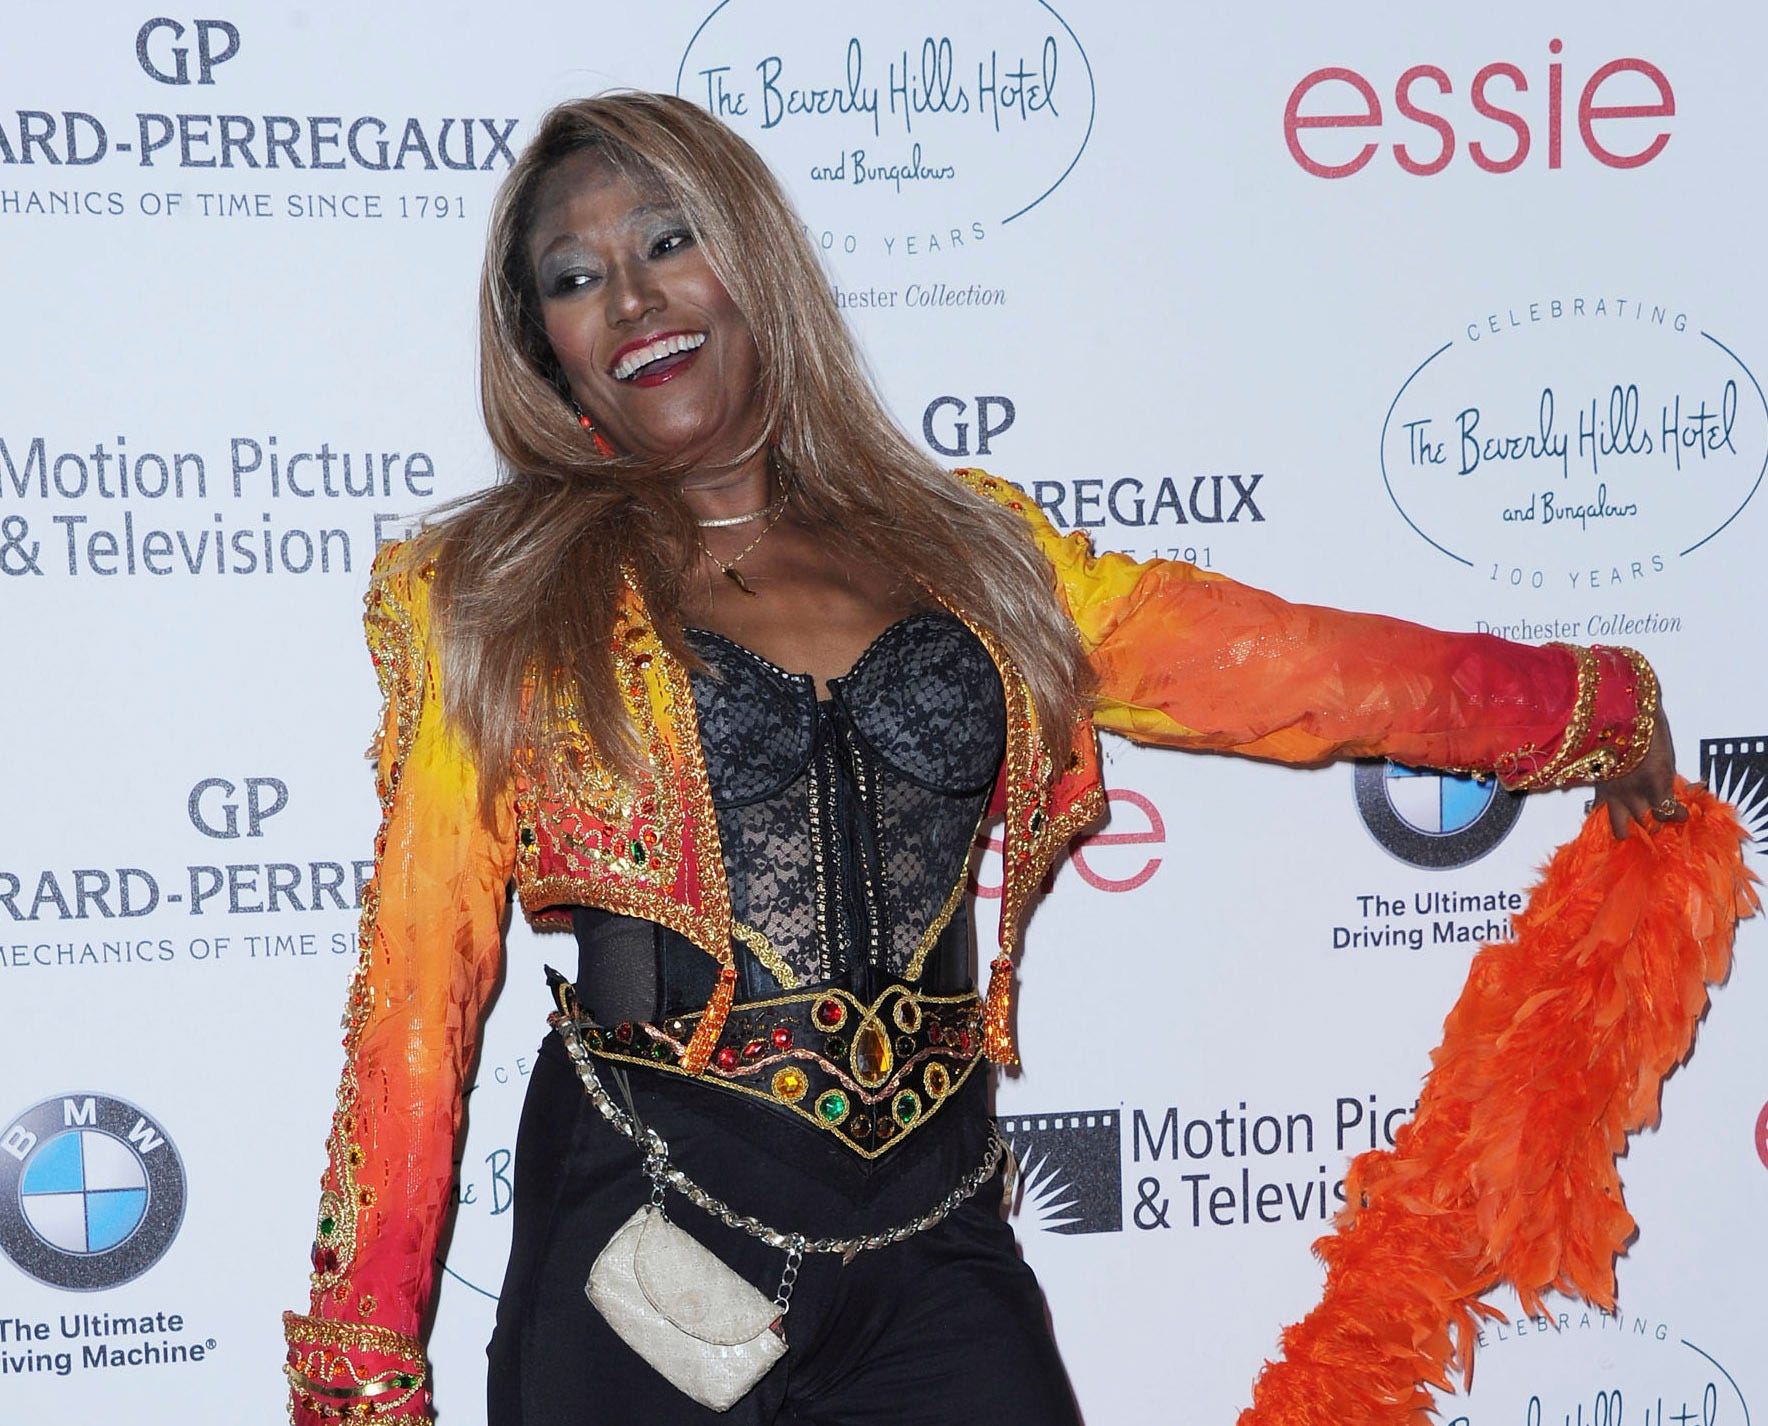 In this June 16, 2012 file photo, Bonnie Pointer attends the 100th Anniversary of The Beverly Hills Hotel in Beverly Hills, Calif. Pointer, founding member of the Pointer Sisters, has died. Publicist Roger Neal says Pointer died of cardiac arrest in Los Angeles on Monday. She was 69.